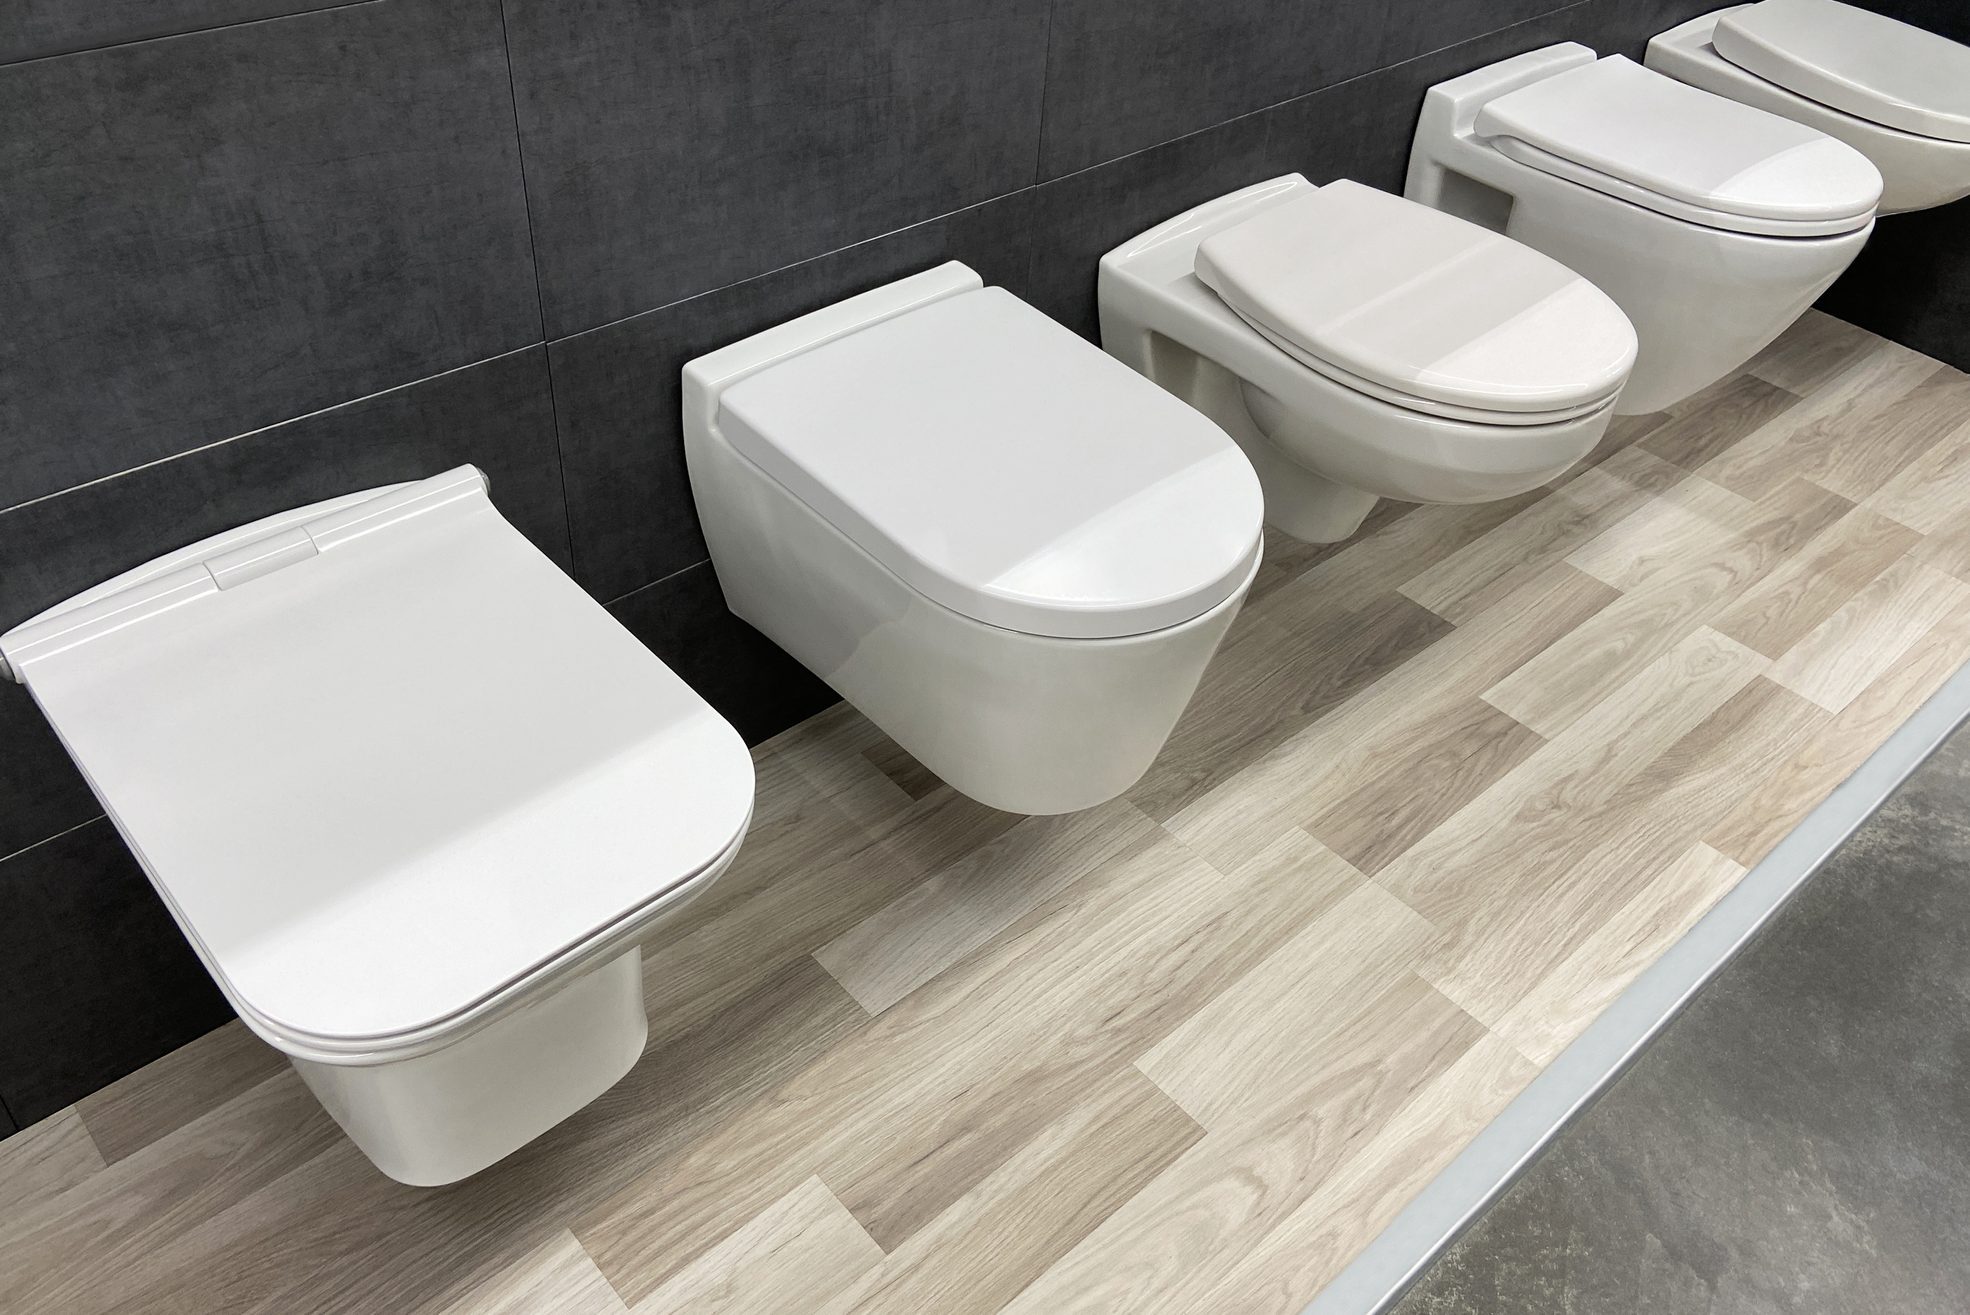 Lever or Button Flush Toilet - Which Is Ideal for You? 